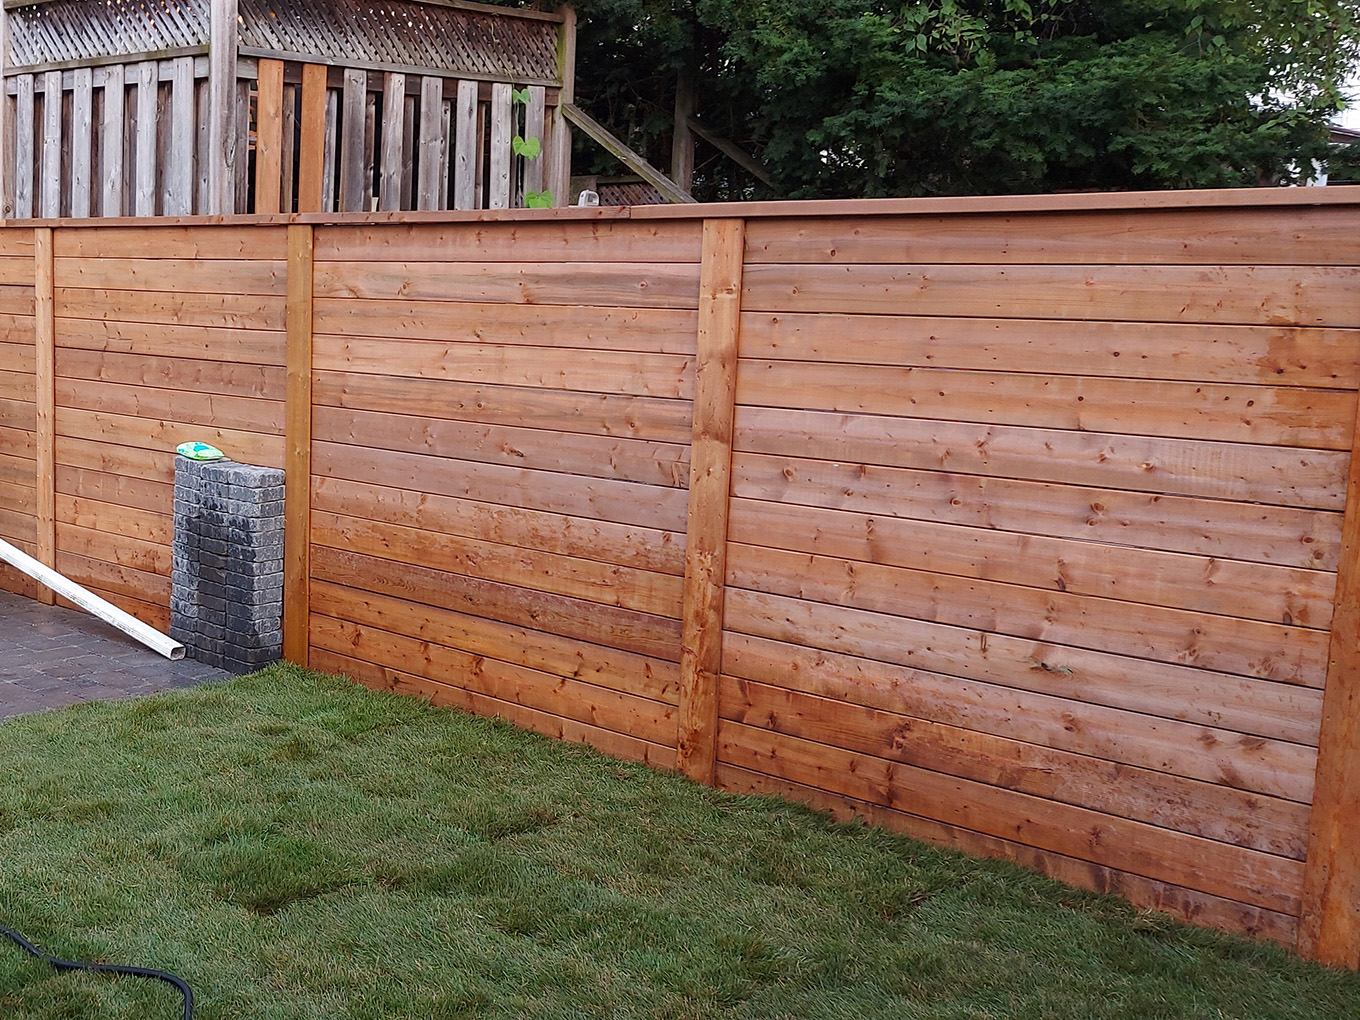 Maple Vaughan ON cap and trim style wood fence